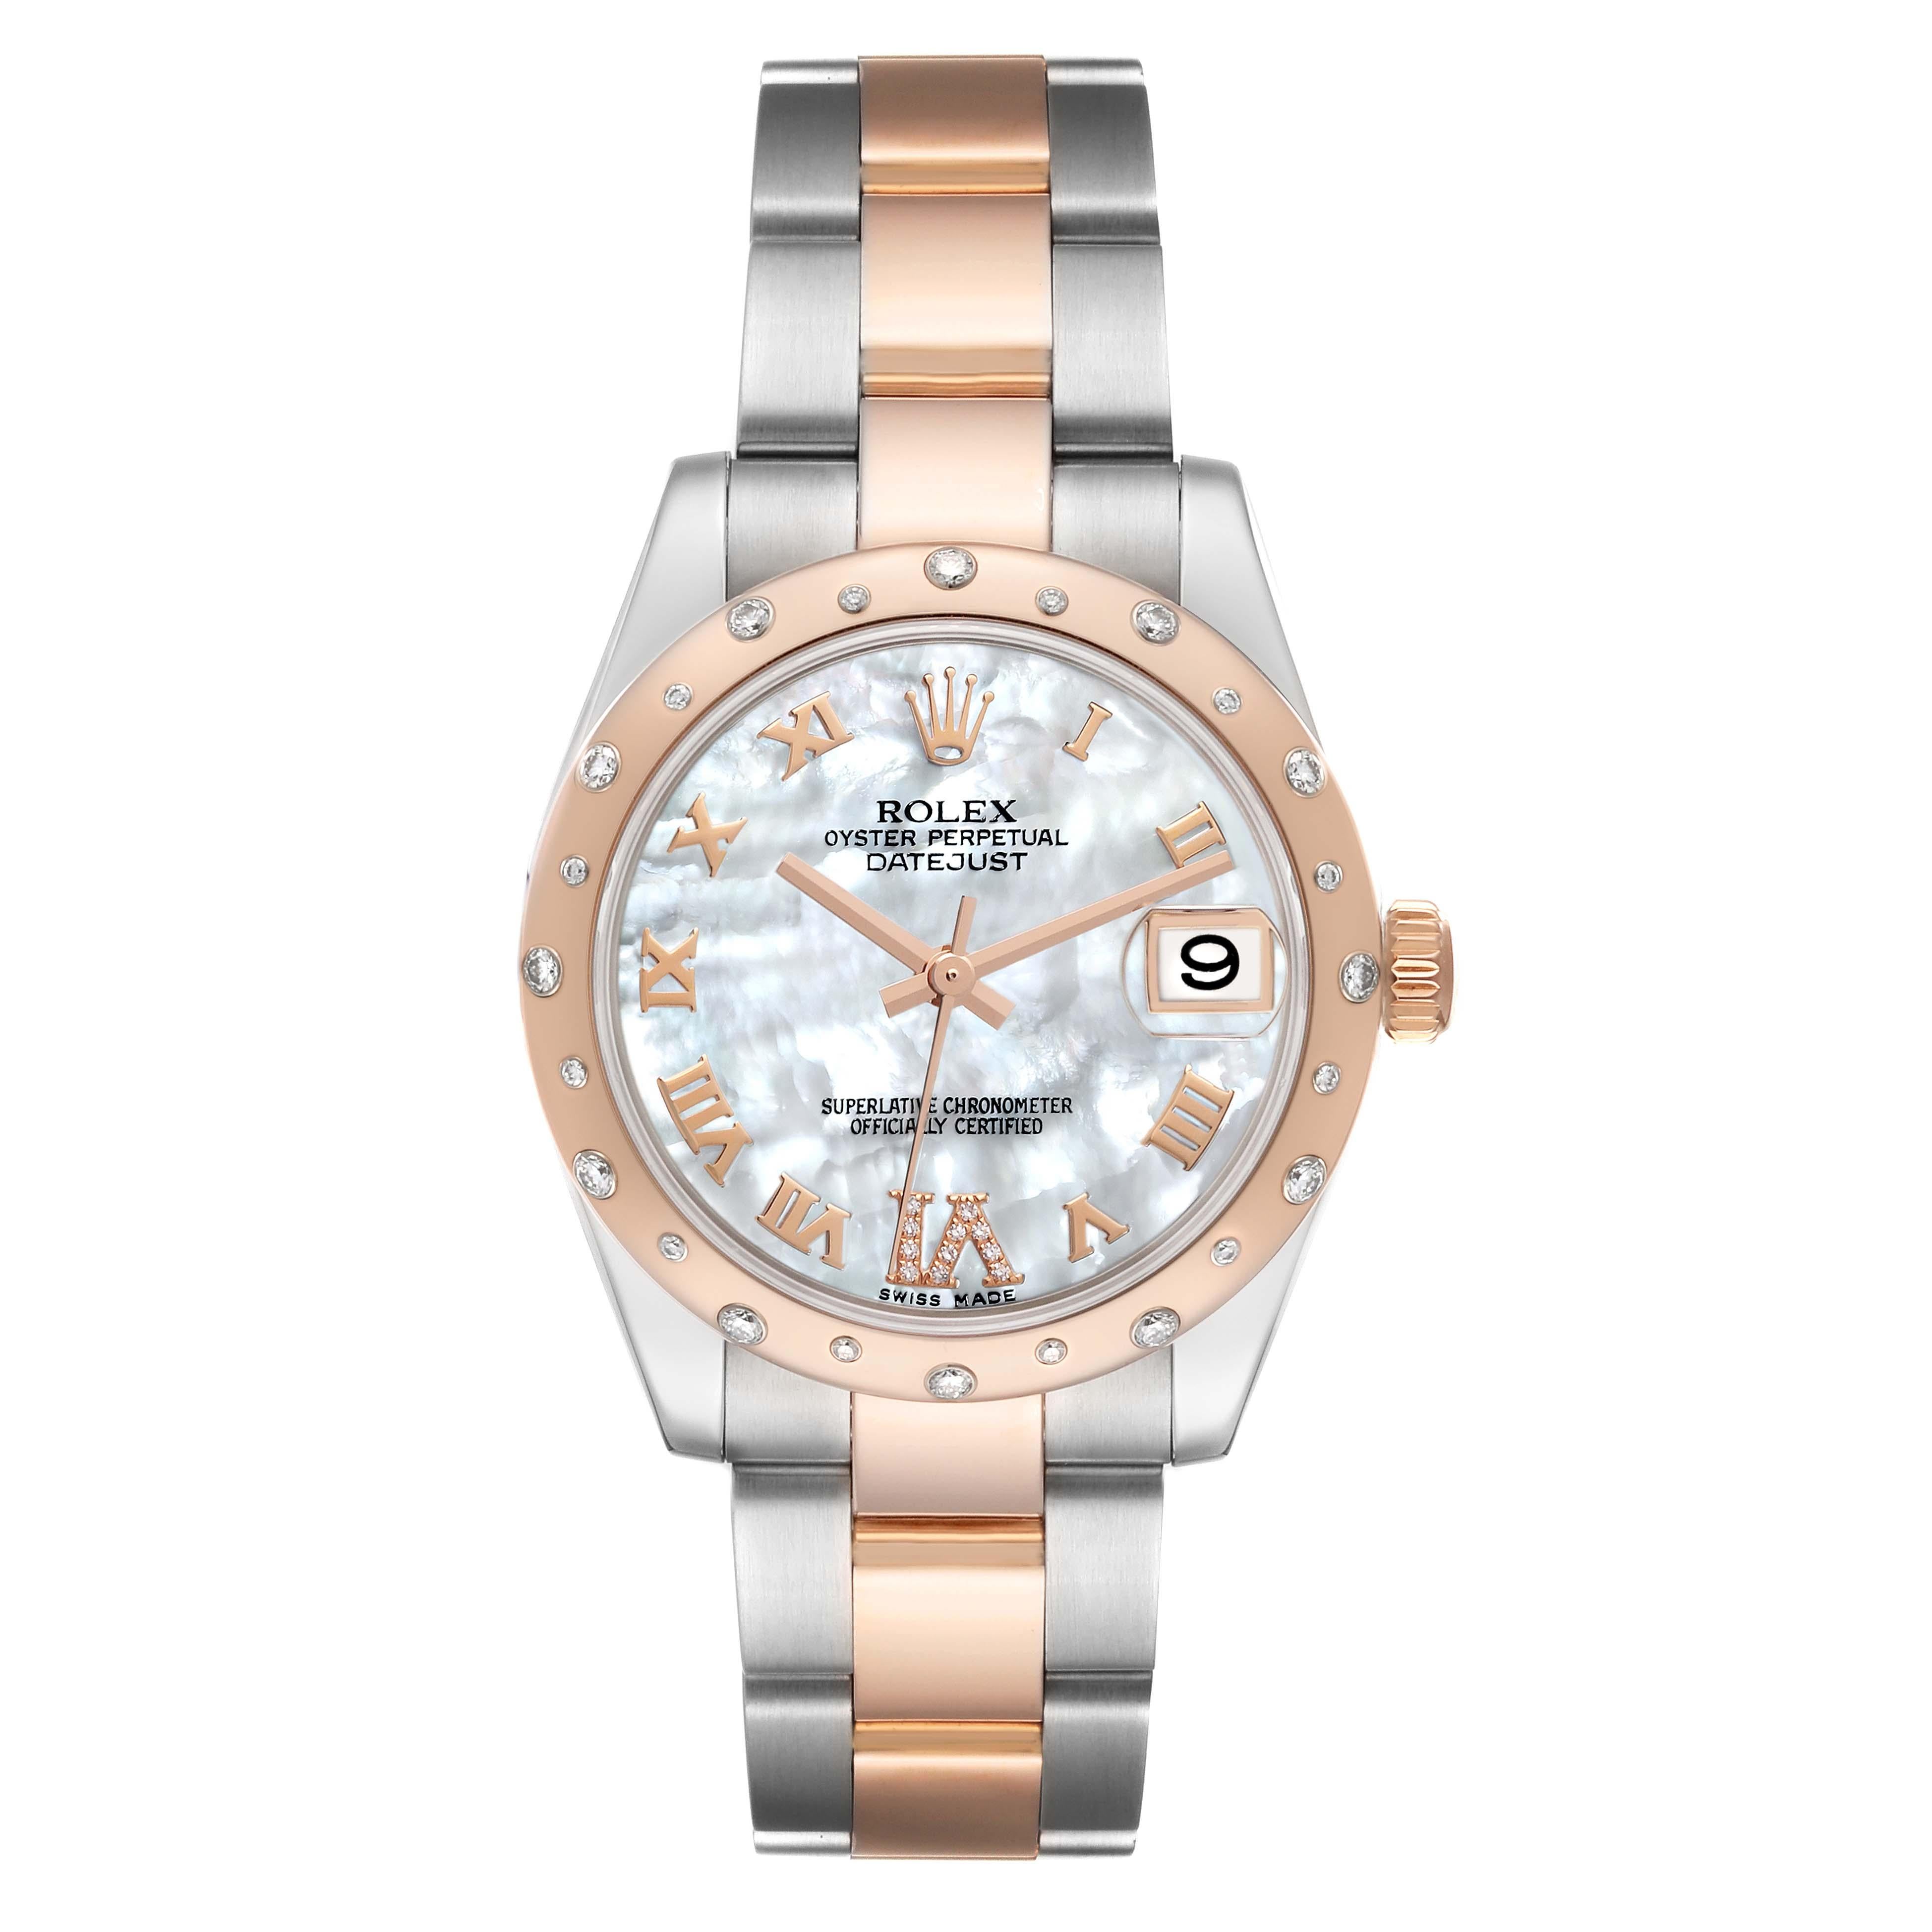 Rolex Datejust 31 Midsize Steel Rose Gold Diamond Ladies Watch 178341. Officially certified chronometer self-winding movement. Stainless steel and 18K rose gold oyster case 31 mm in diameter. Rolex logo on a crown. 18K rose gold smooth domed bezel